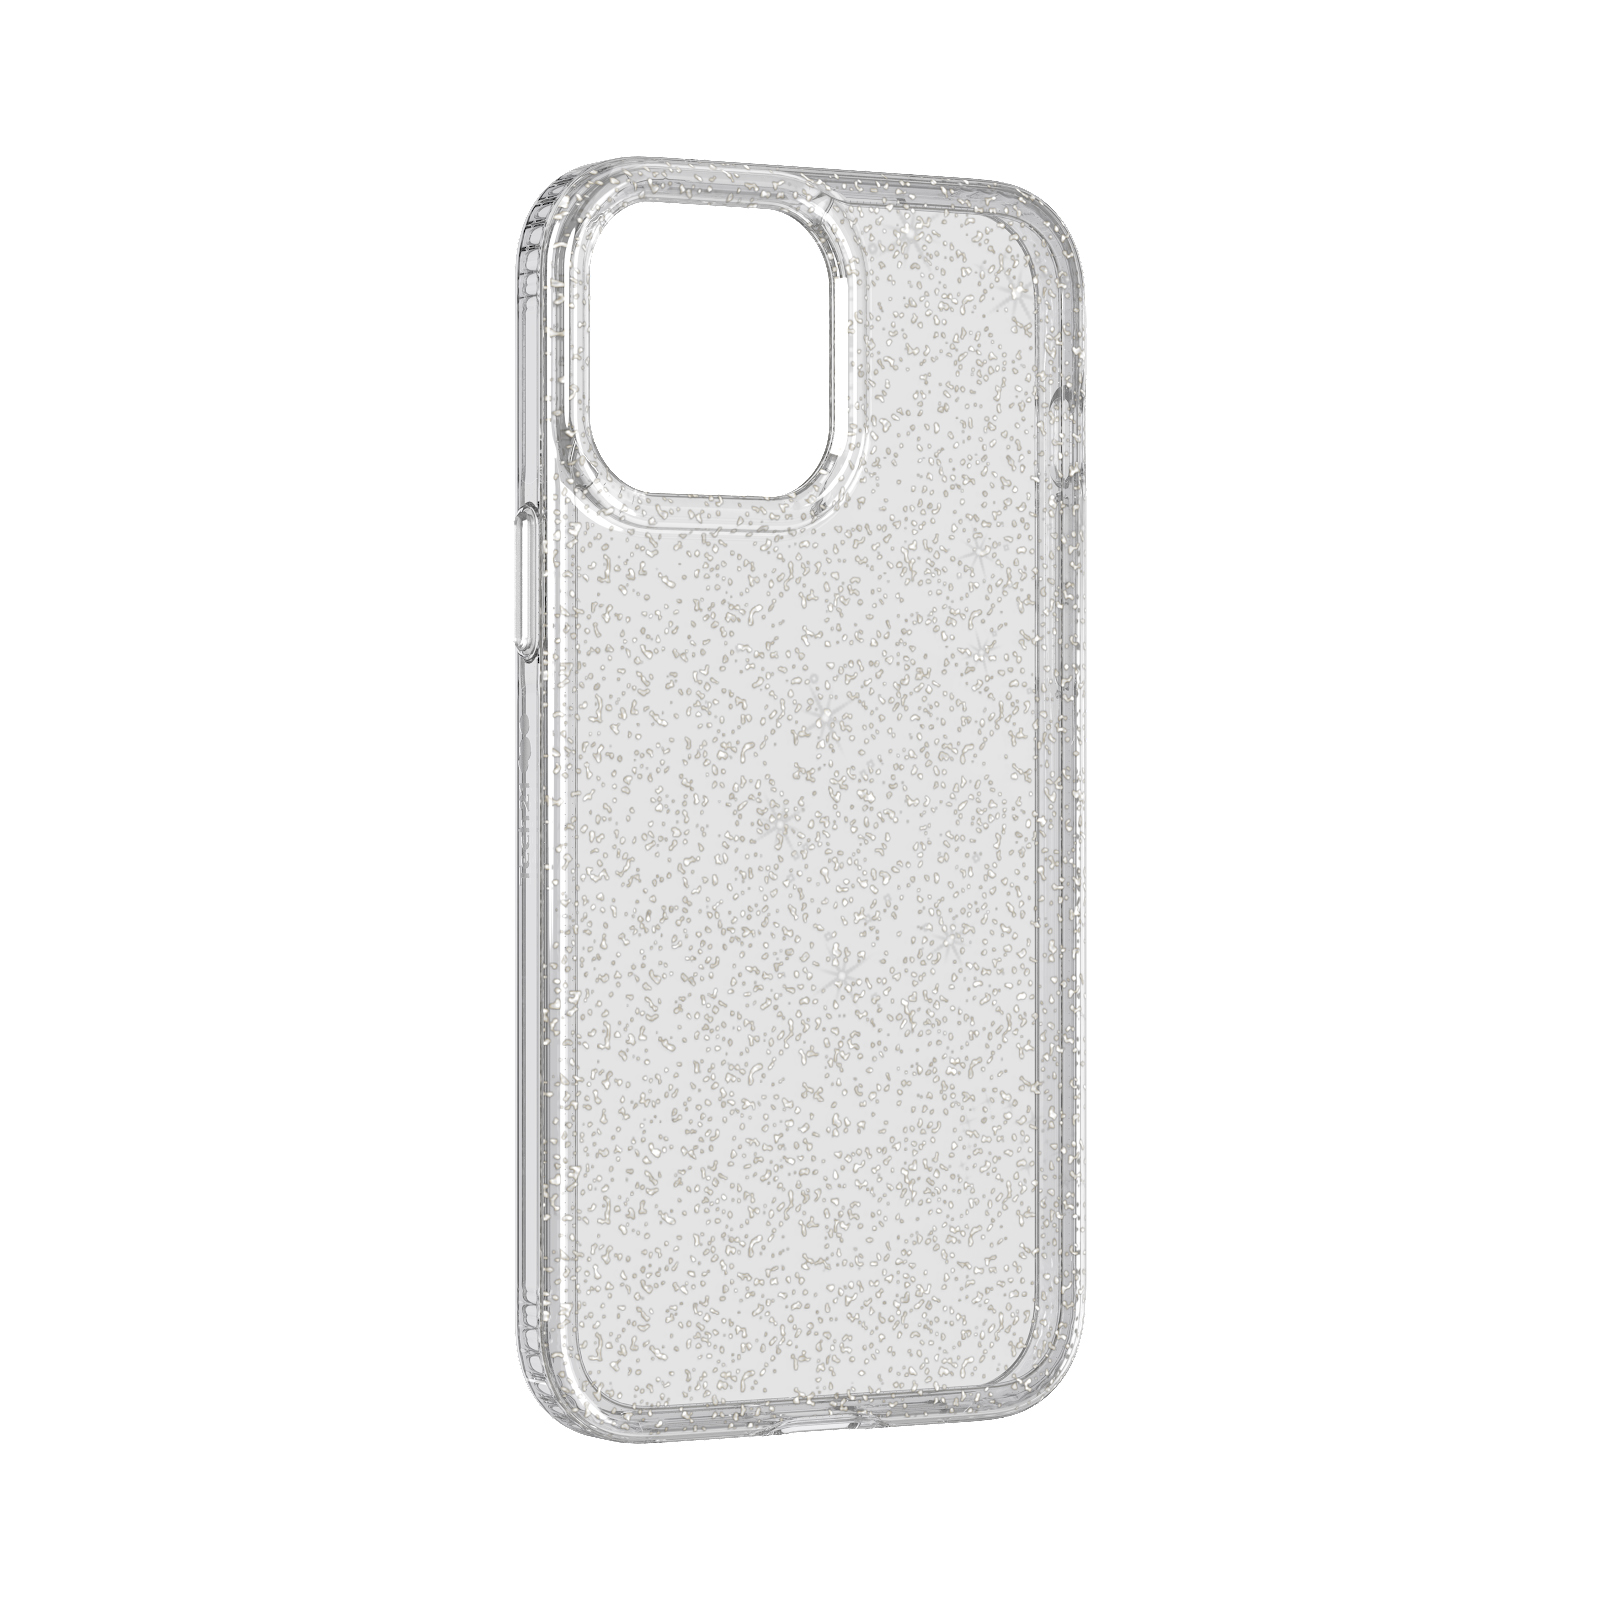 Tech21 Evo Sparkle for iPhone 13 Pro (Silver)